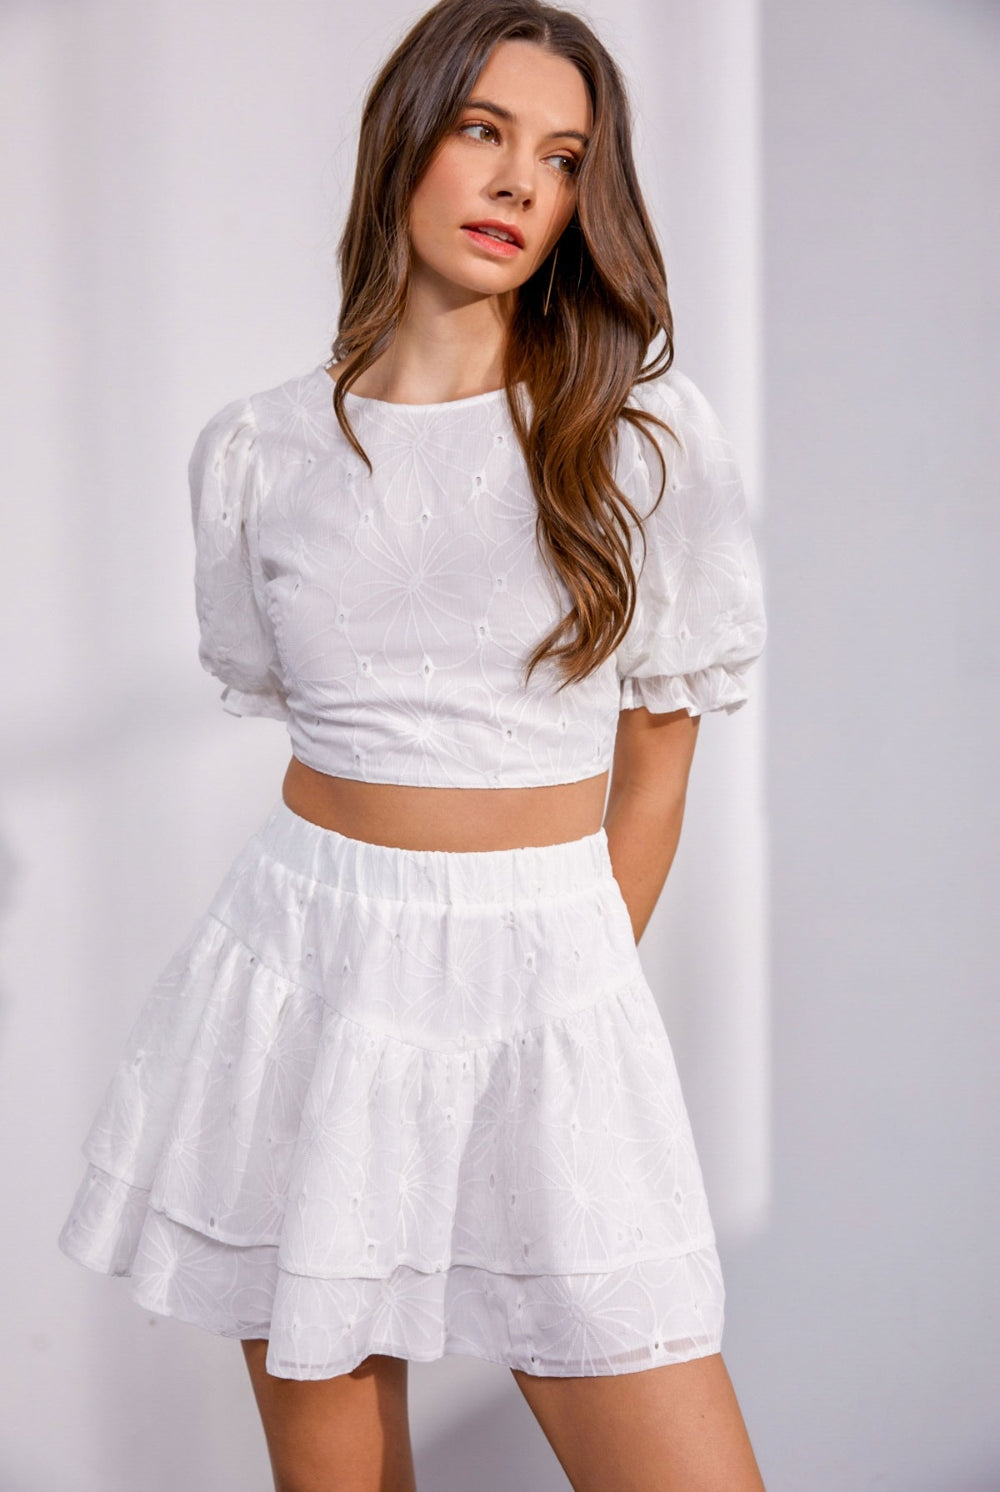 A model wearing a white lace crop top with a floral design, embodying a fresh and feminine style.